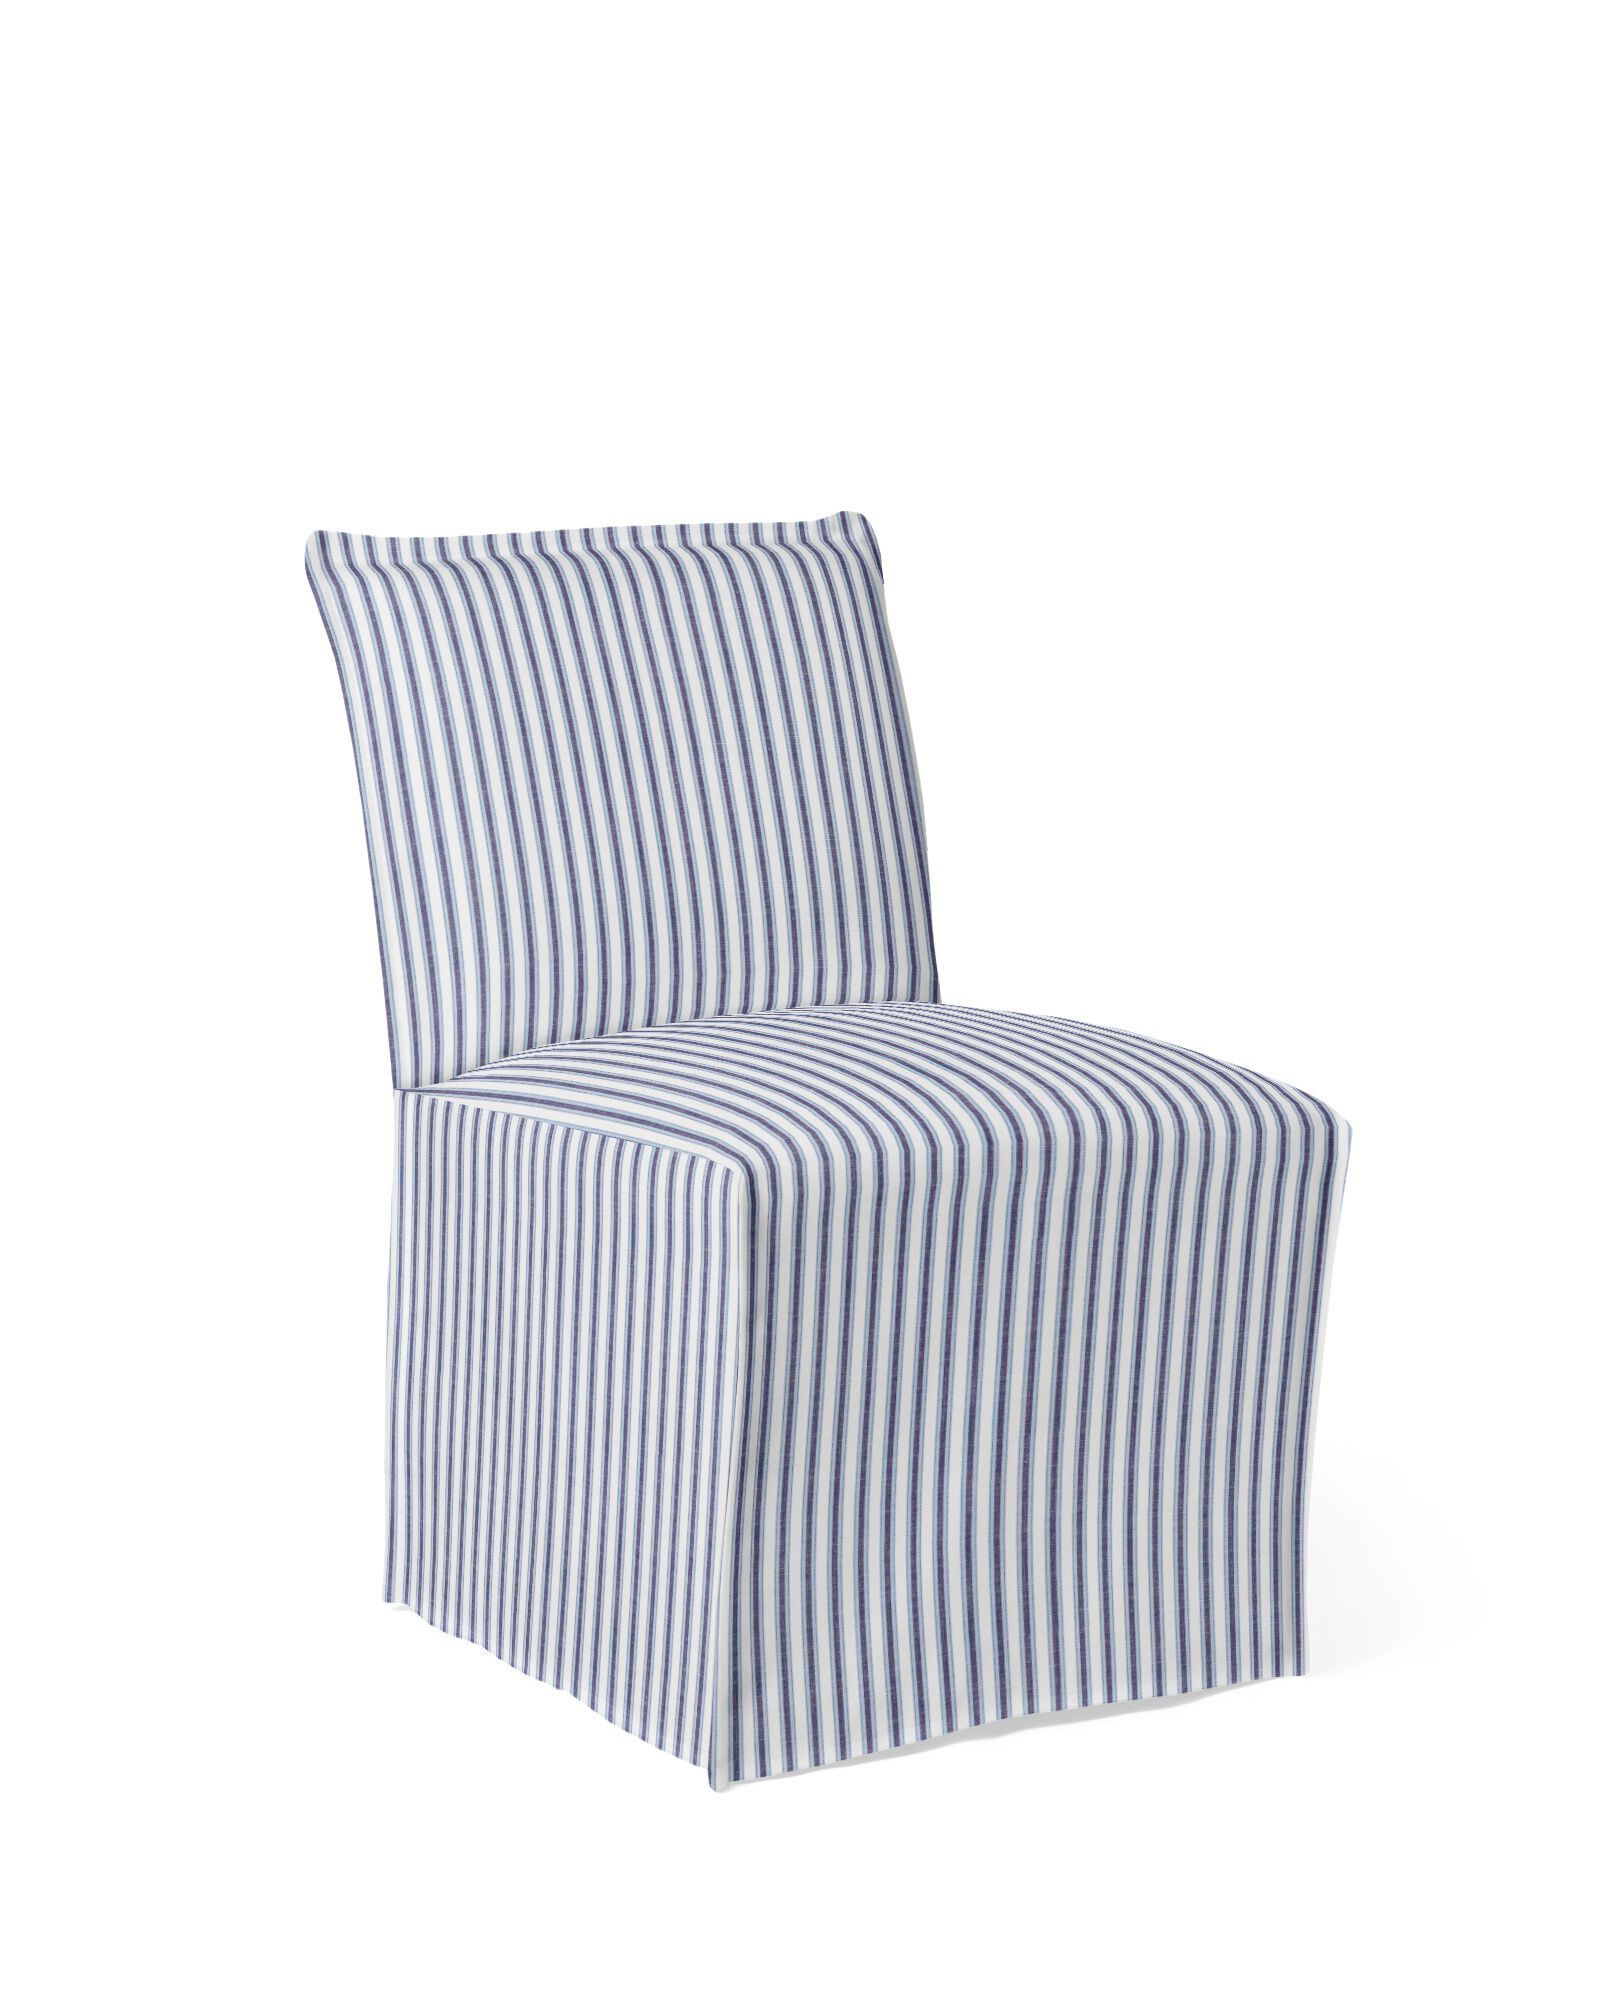 Sundial Dining Side Chair – White/Navy Perennials Dock Stripe | Serena and Lily